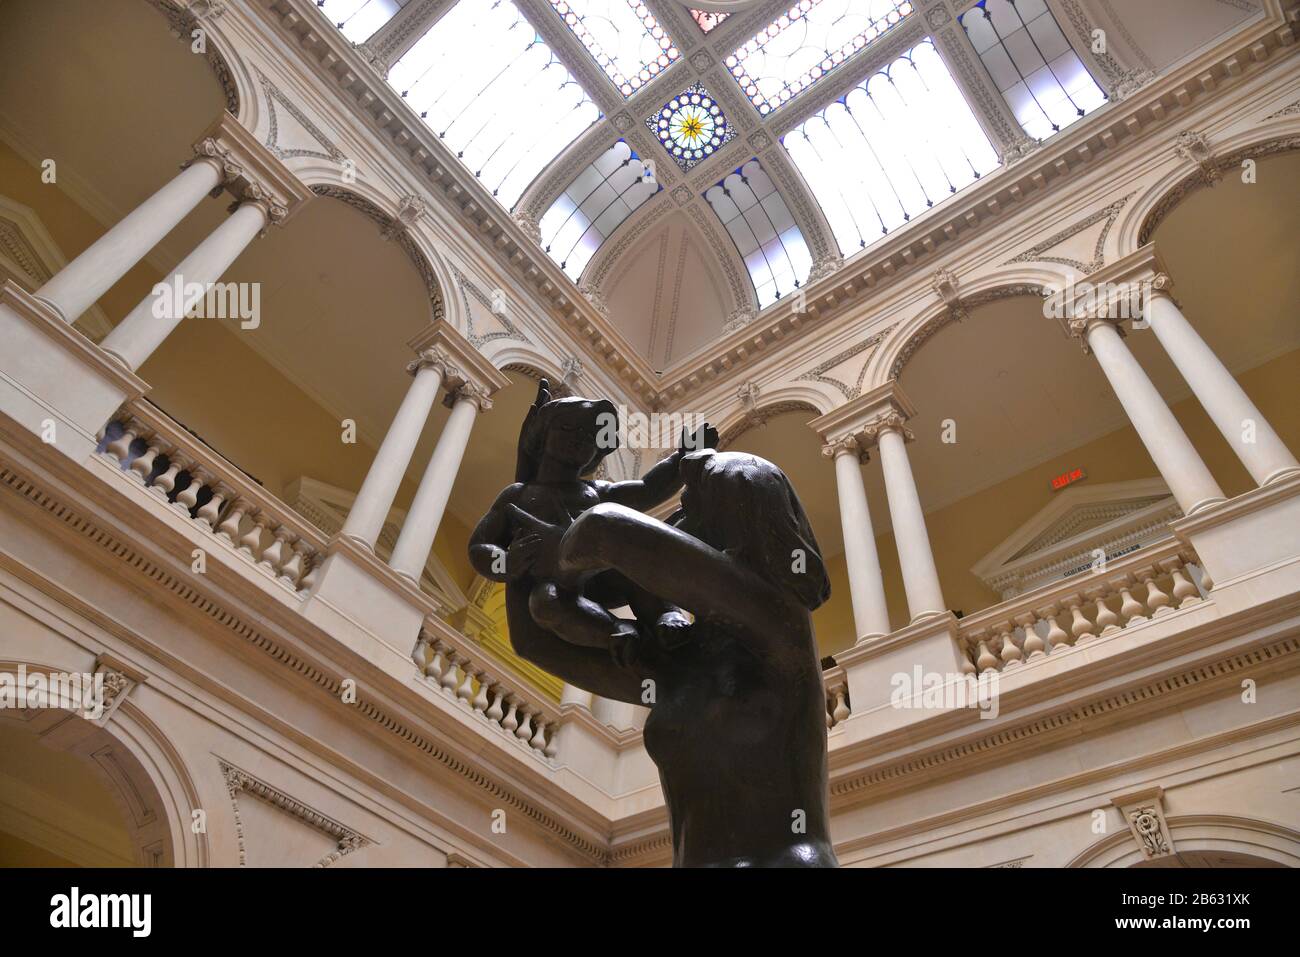 Osgoode Hall - interior with sculpture Stock Photo